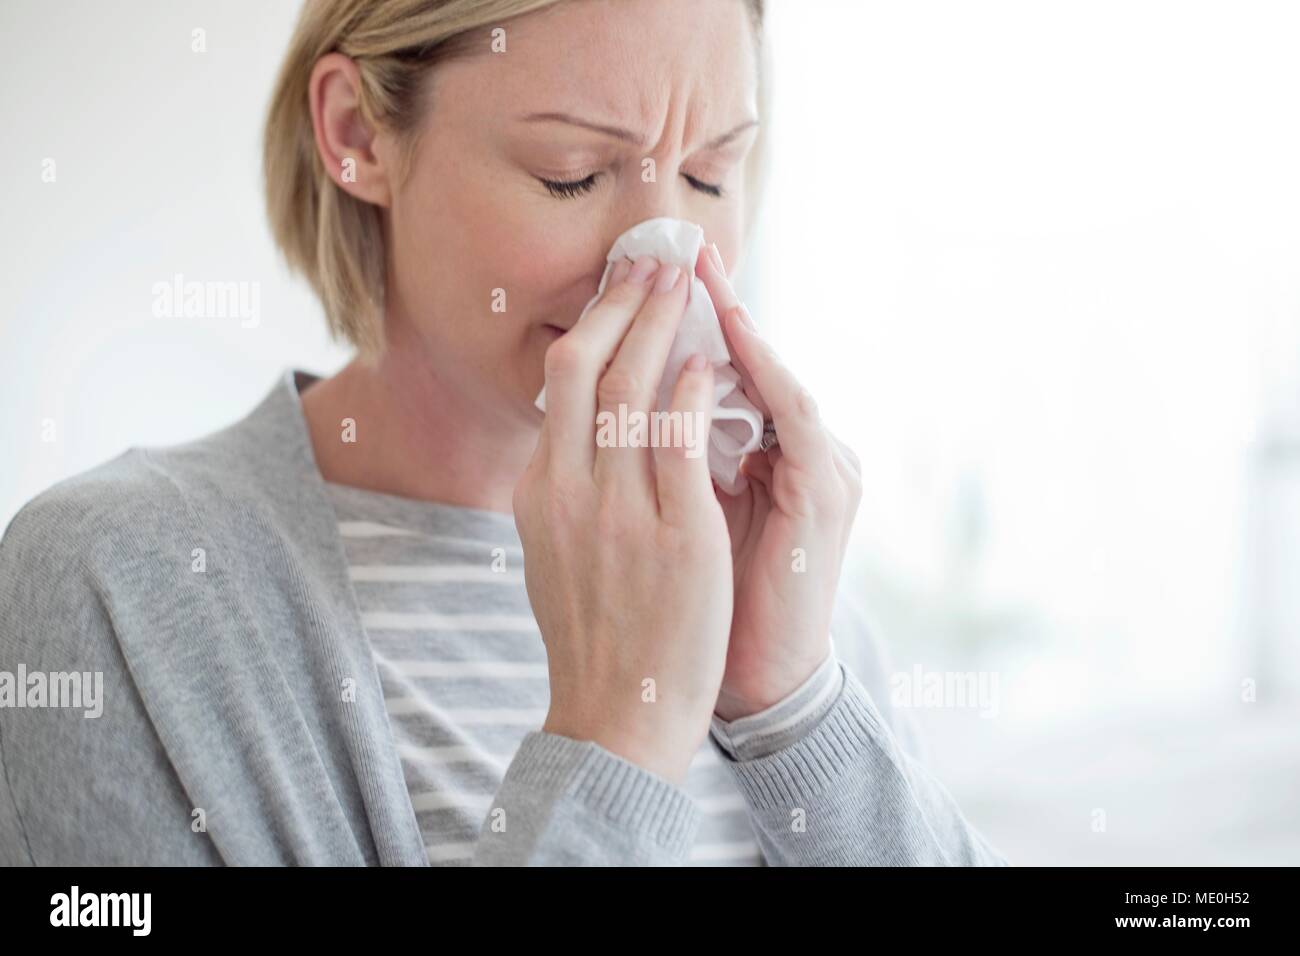 Mid adult woman blowing her nose. Stock Photo